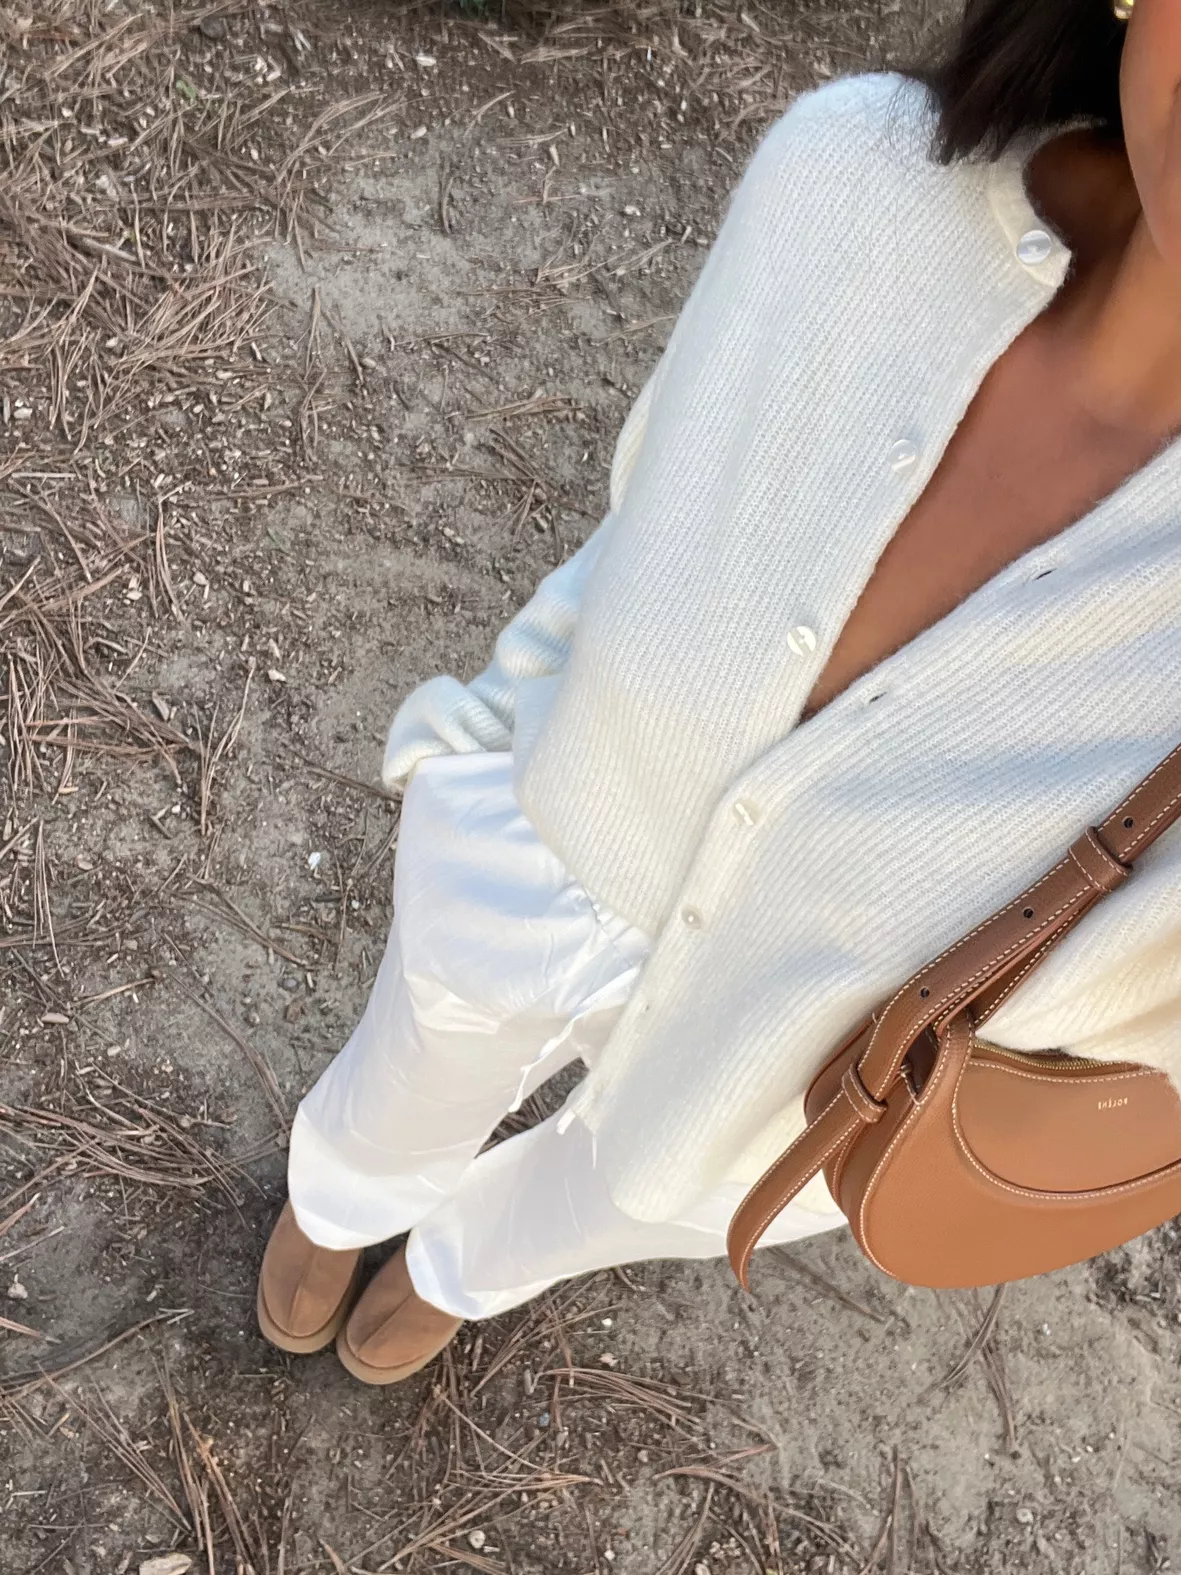 outfitcheck #zarafinds #uggslippers #casualoutfits